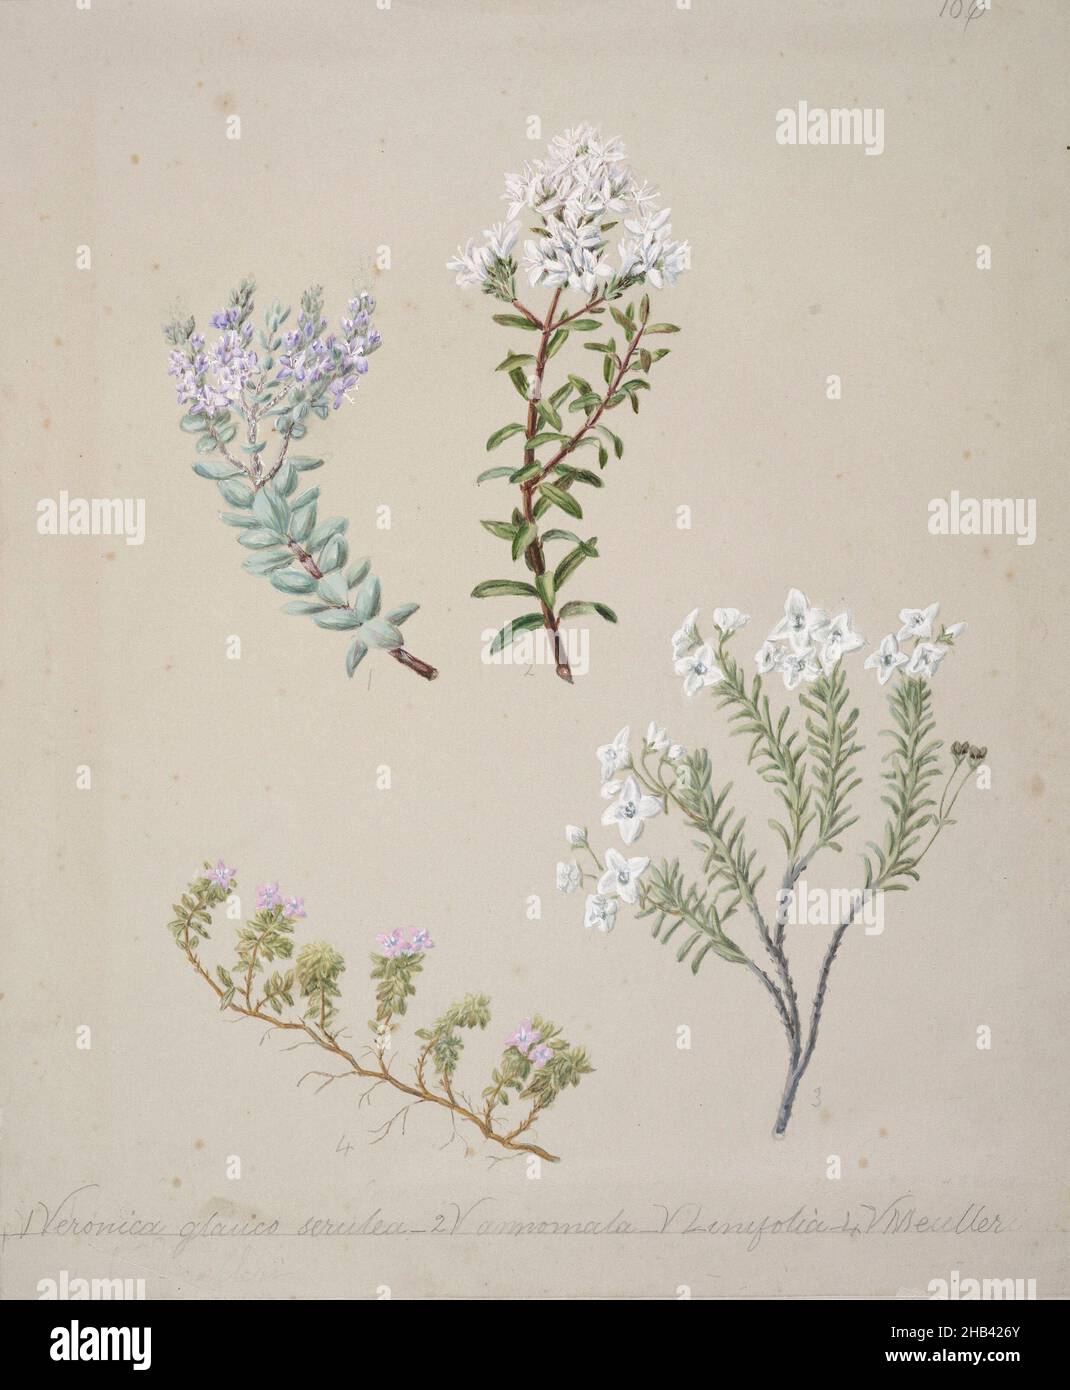 [Veronica (4 species)], Sarah Featon, circa 1885, New Zealand, In 1889 Sarah Featon and her husband Edward Featon published The Art Album of New Zealand Flora, in which they sought to dispute the ‘mistaken notion that New Zealand is peculiarly destitute of native flowers’. While the title emphasises the artistic nature of their enterprise, in the preface they describe the choice they made between selecting a handful of the ‘best and most showy representatives of indigenous flowers’ and publishing them in a ‘haphazard manner, with just a soupcon of descriptive matter to serve as a garnish Stock Photo